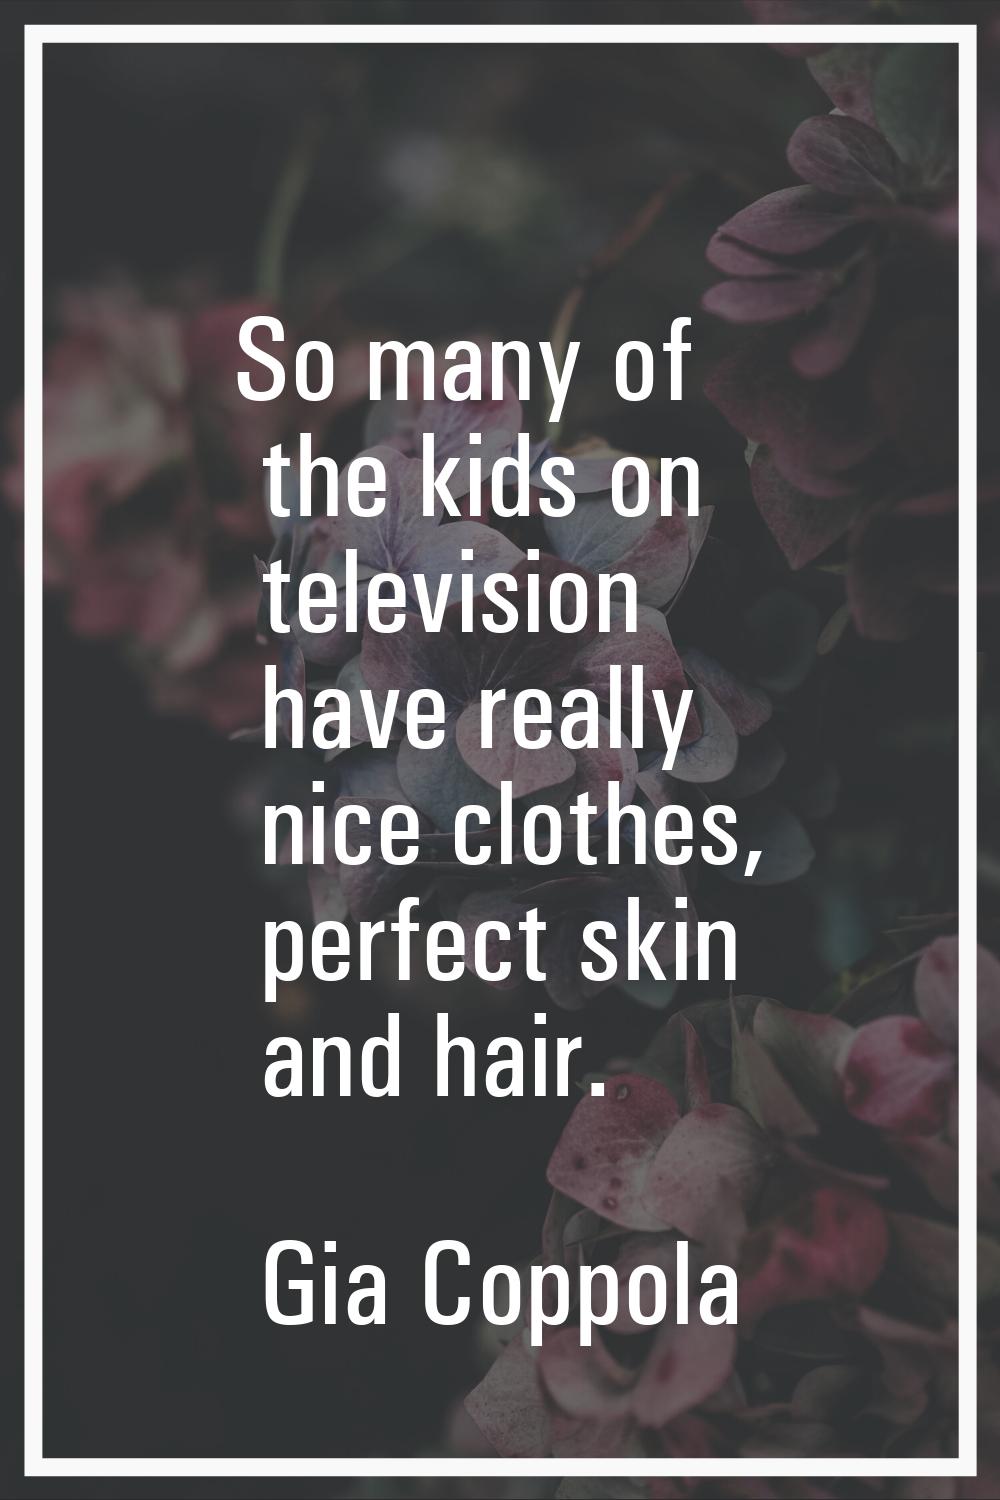 So many of the kids on television have really nice clothes, perfect skin and hair.